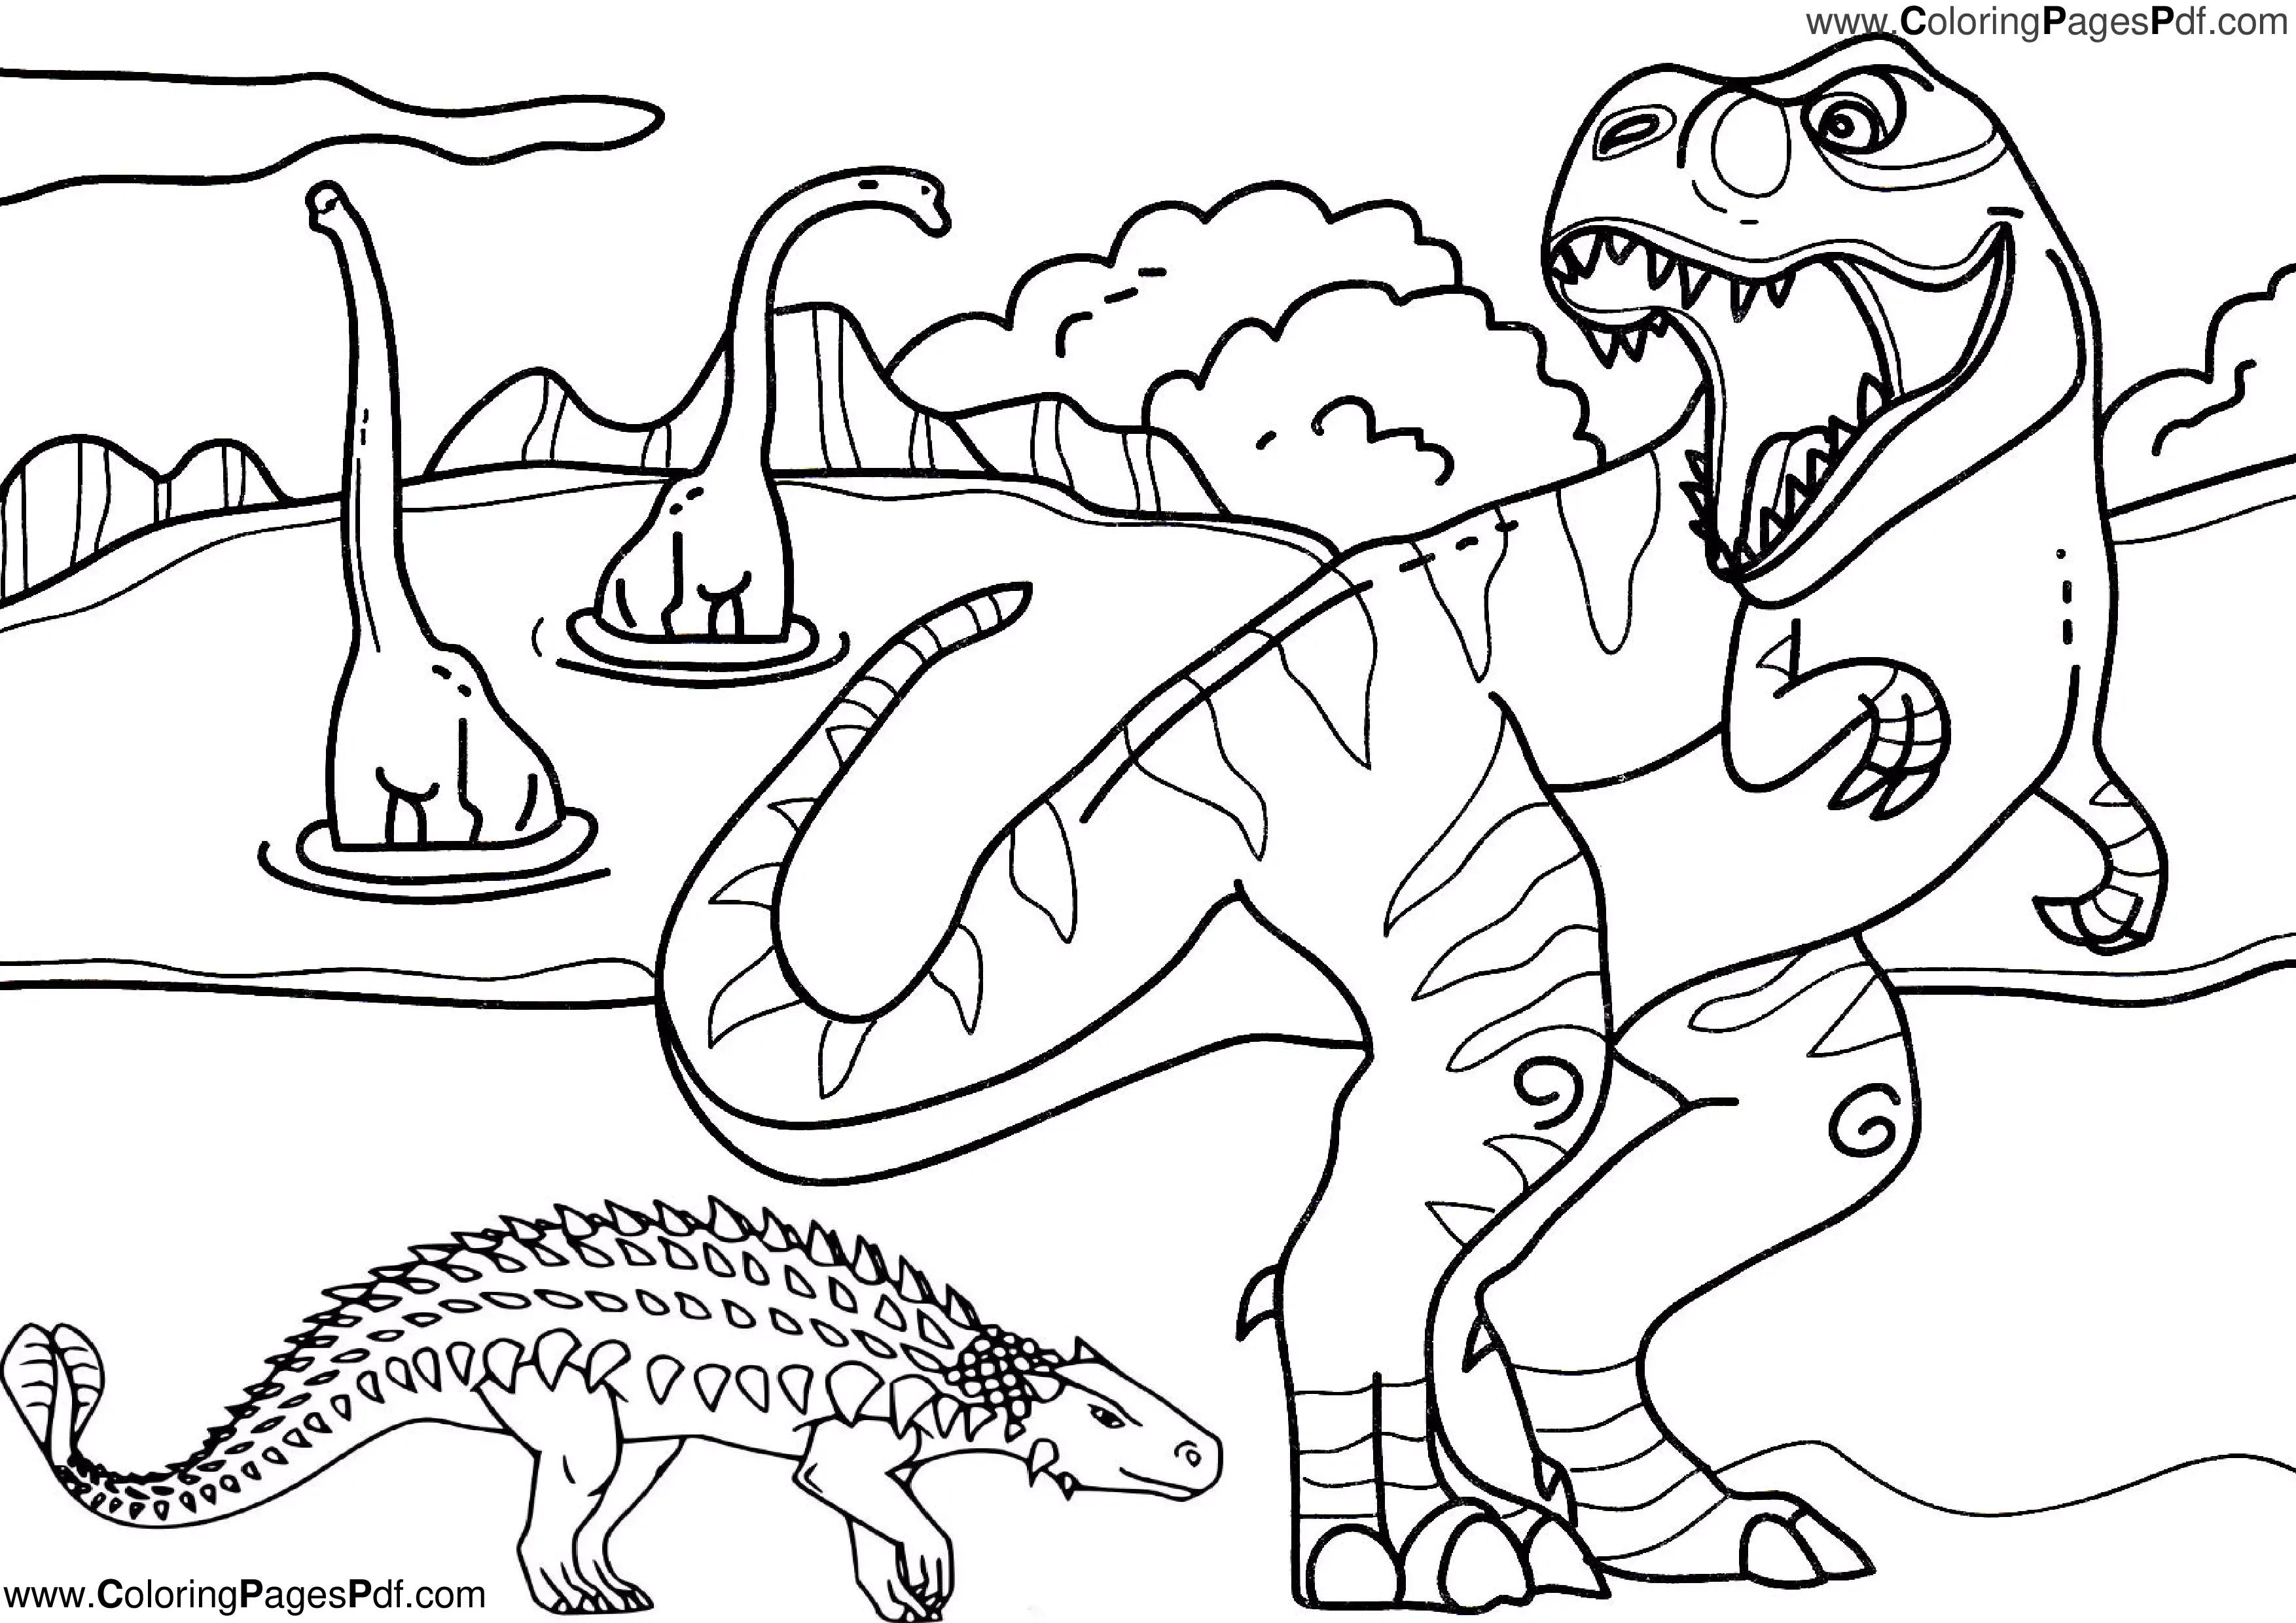 Simple dinosaur coloring pages